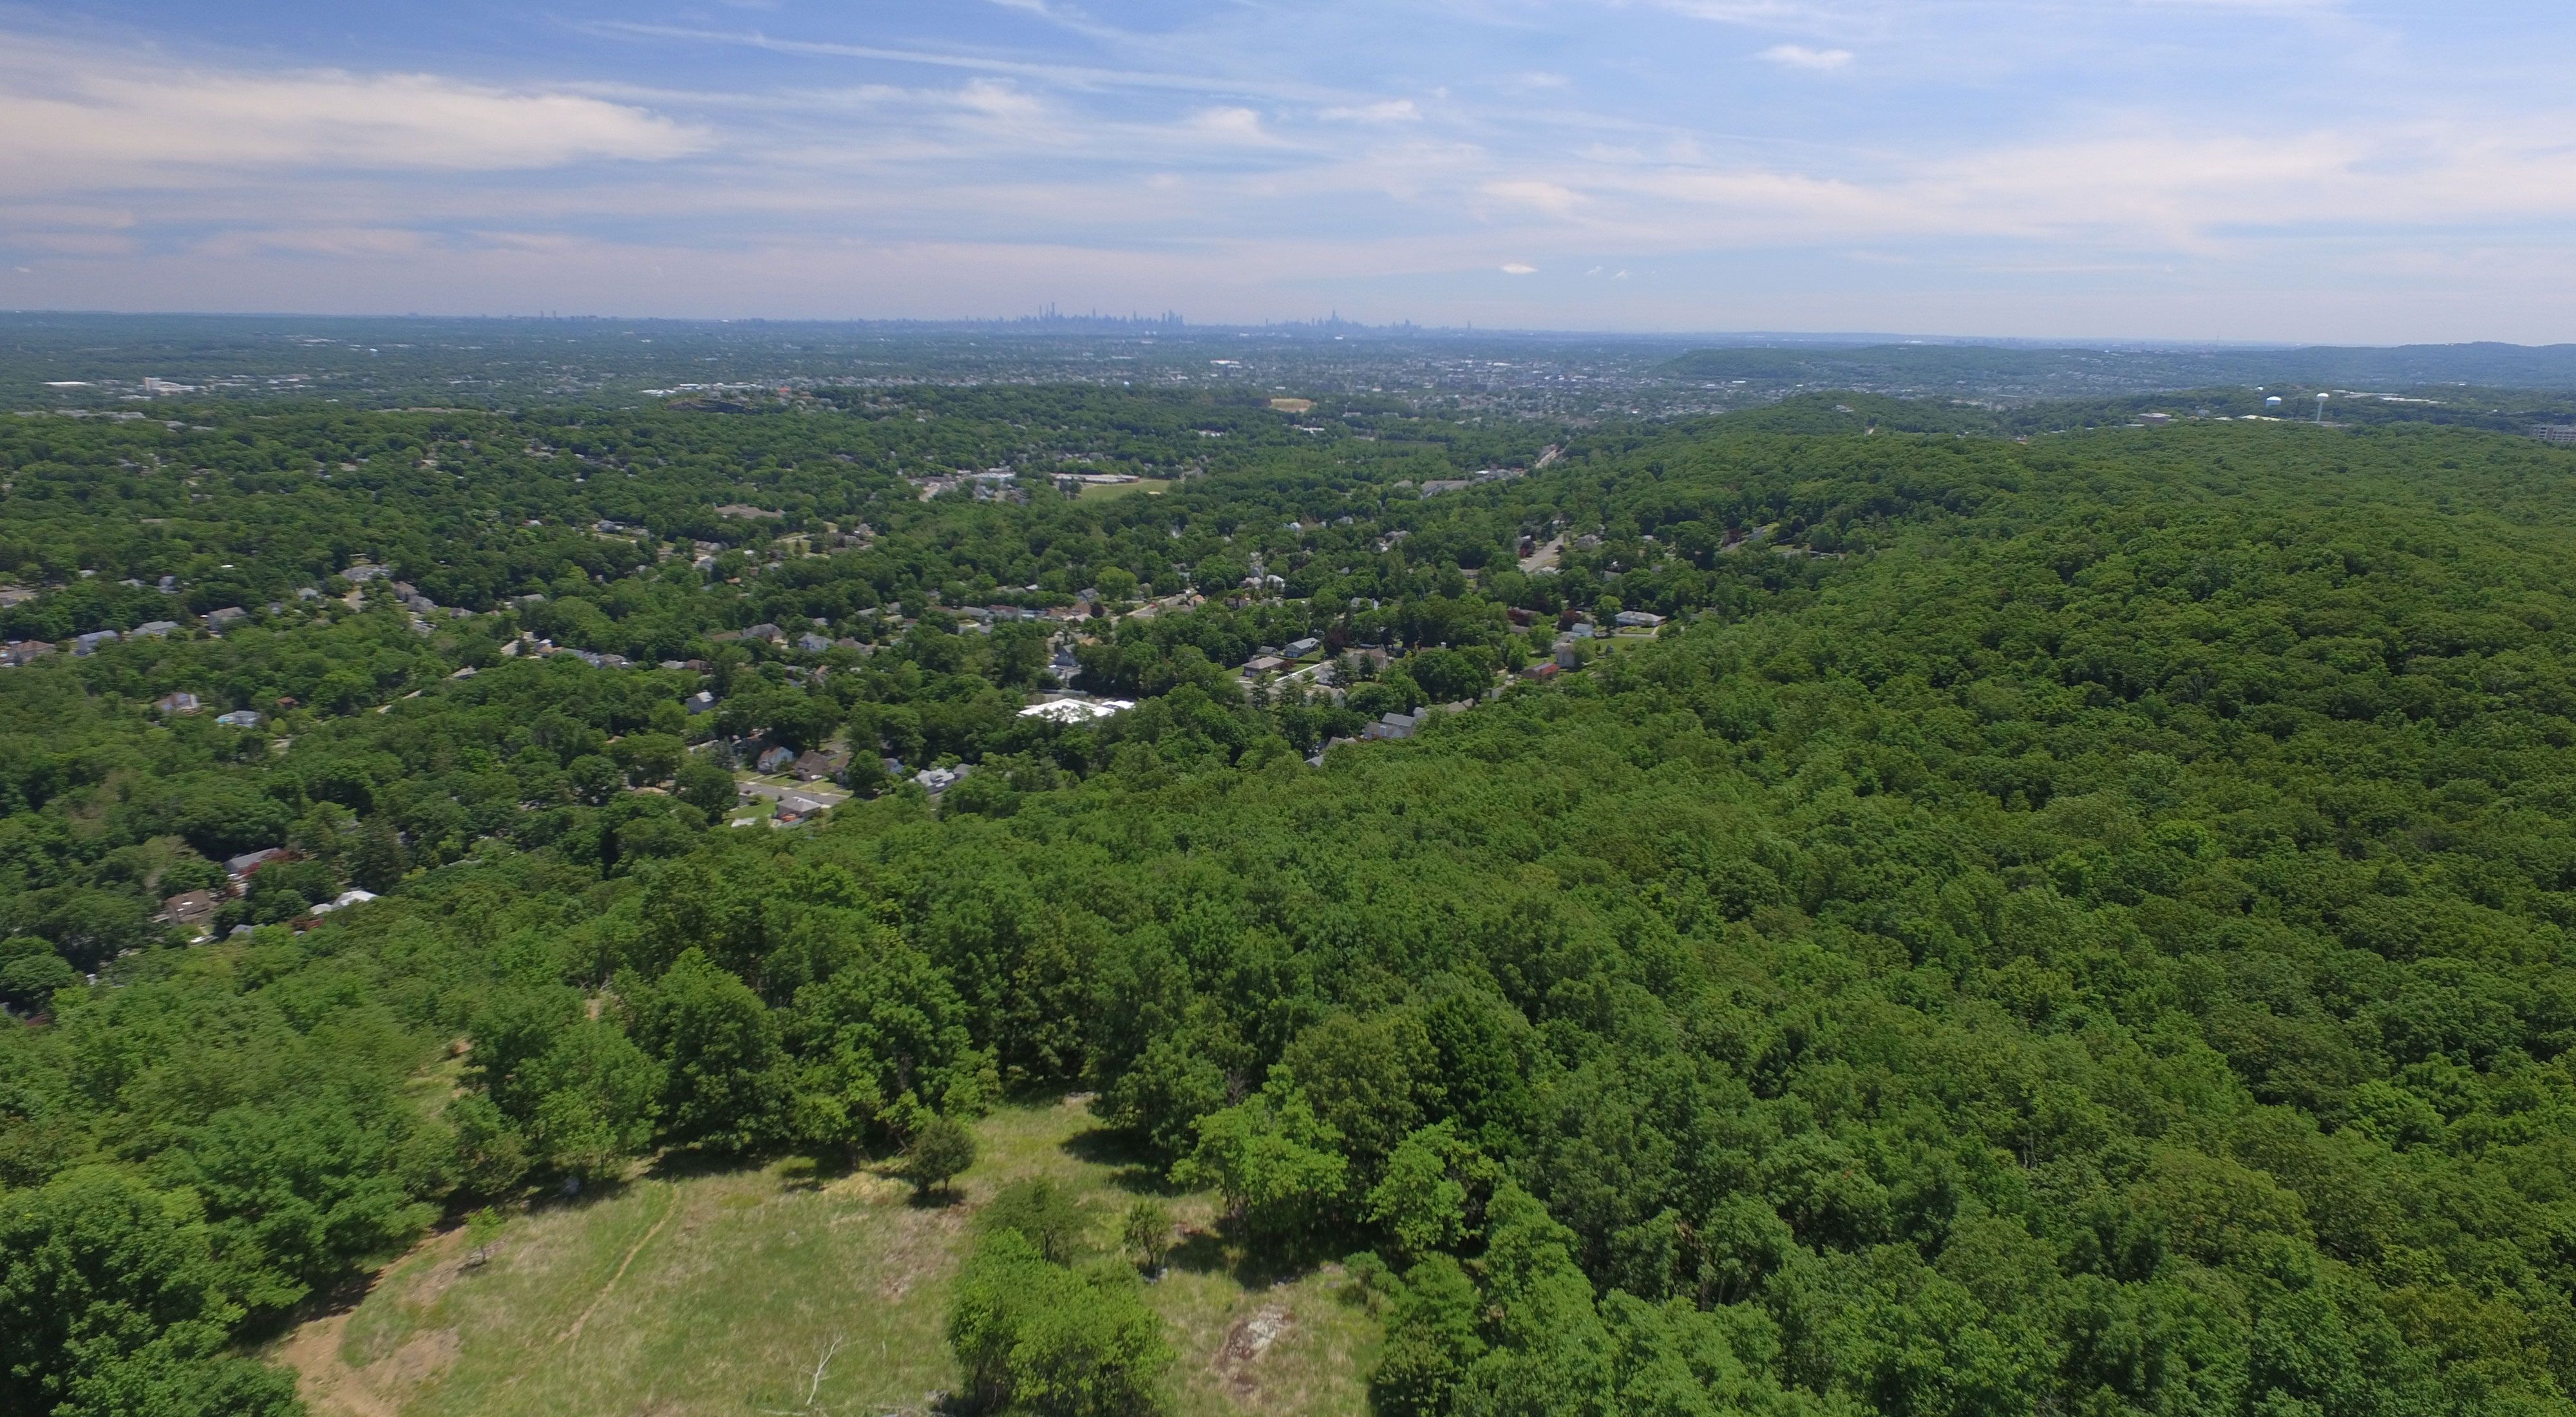 Aerial view of a wide, densely forested landscape interspersed with a few buildings.